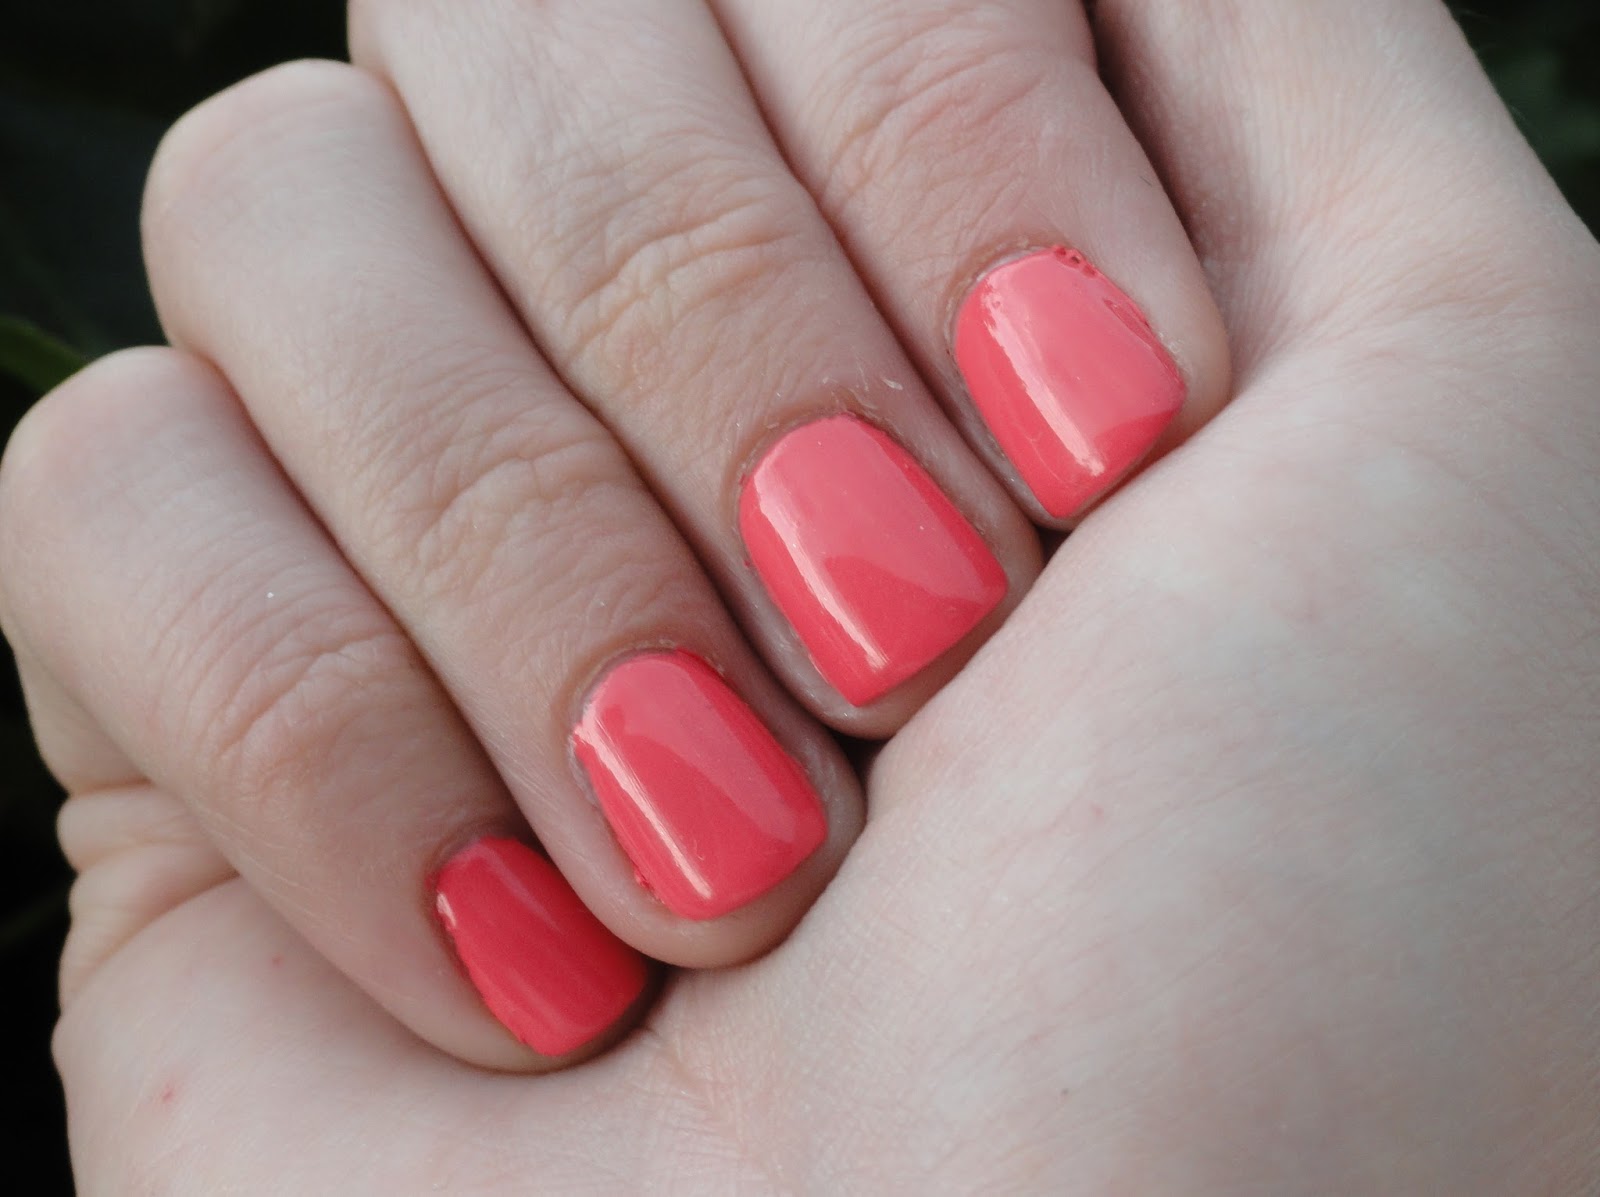 10. Sally Hansen Hard as Nails Xtreme Wear in "Coral Reef" - wide 2